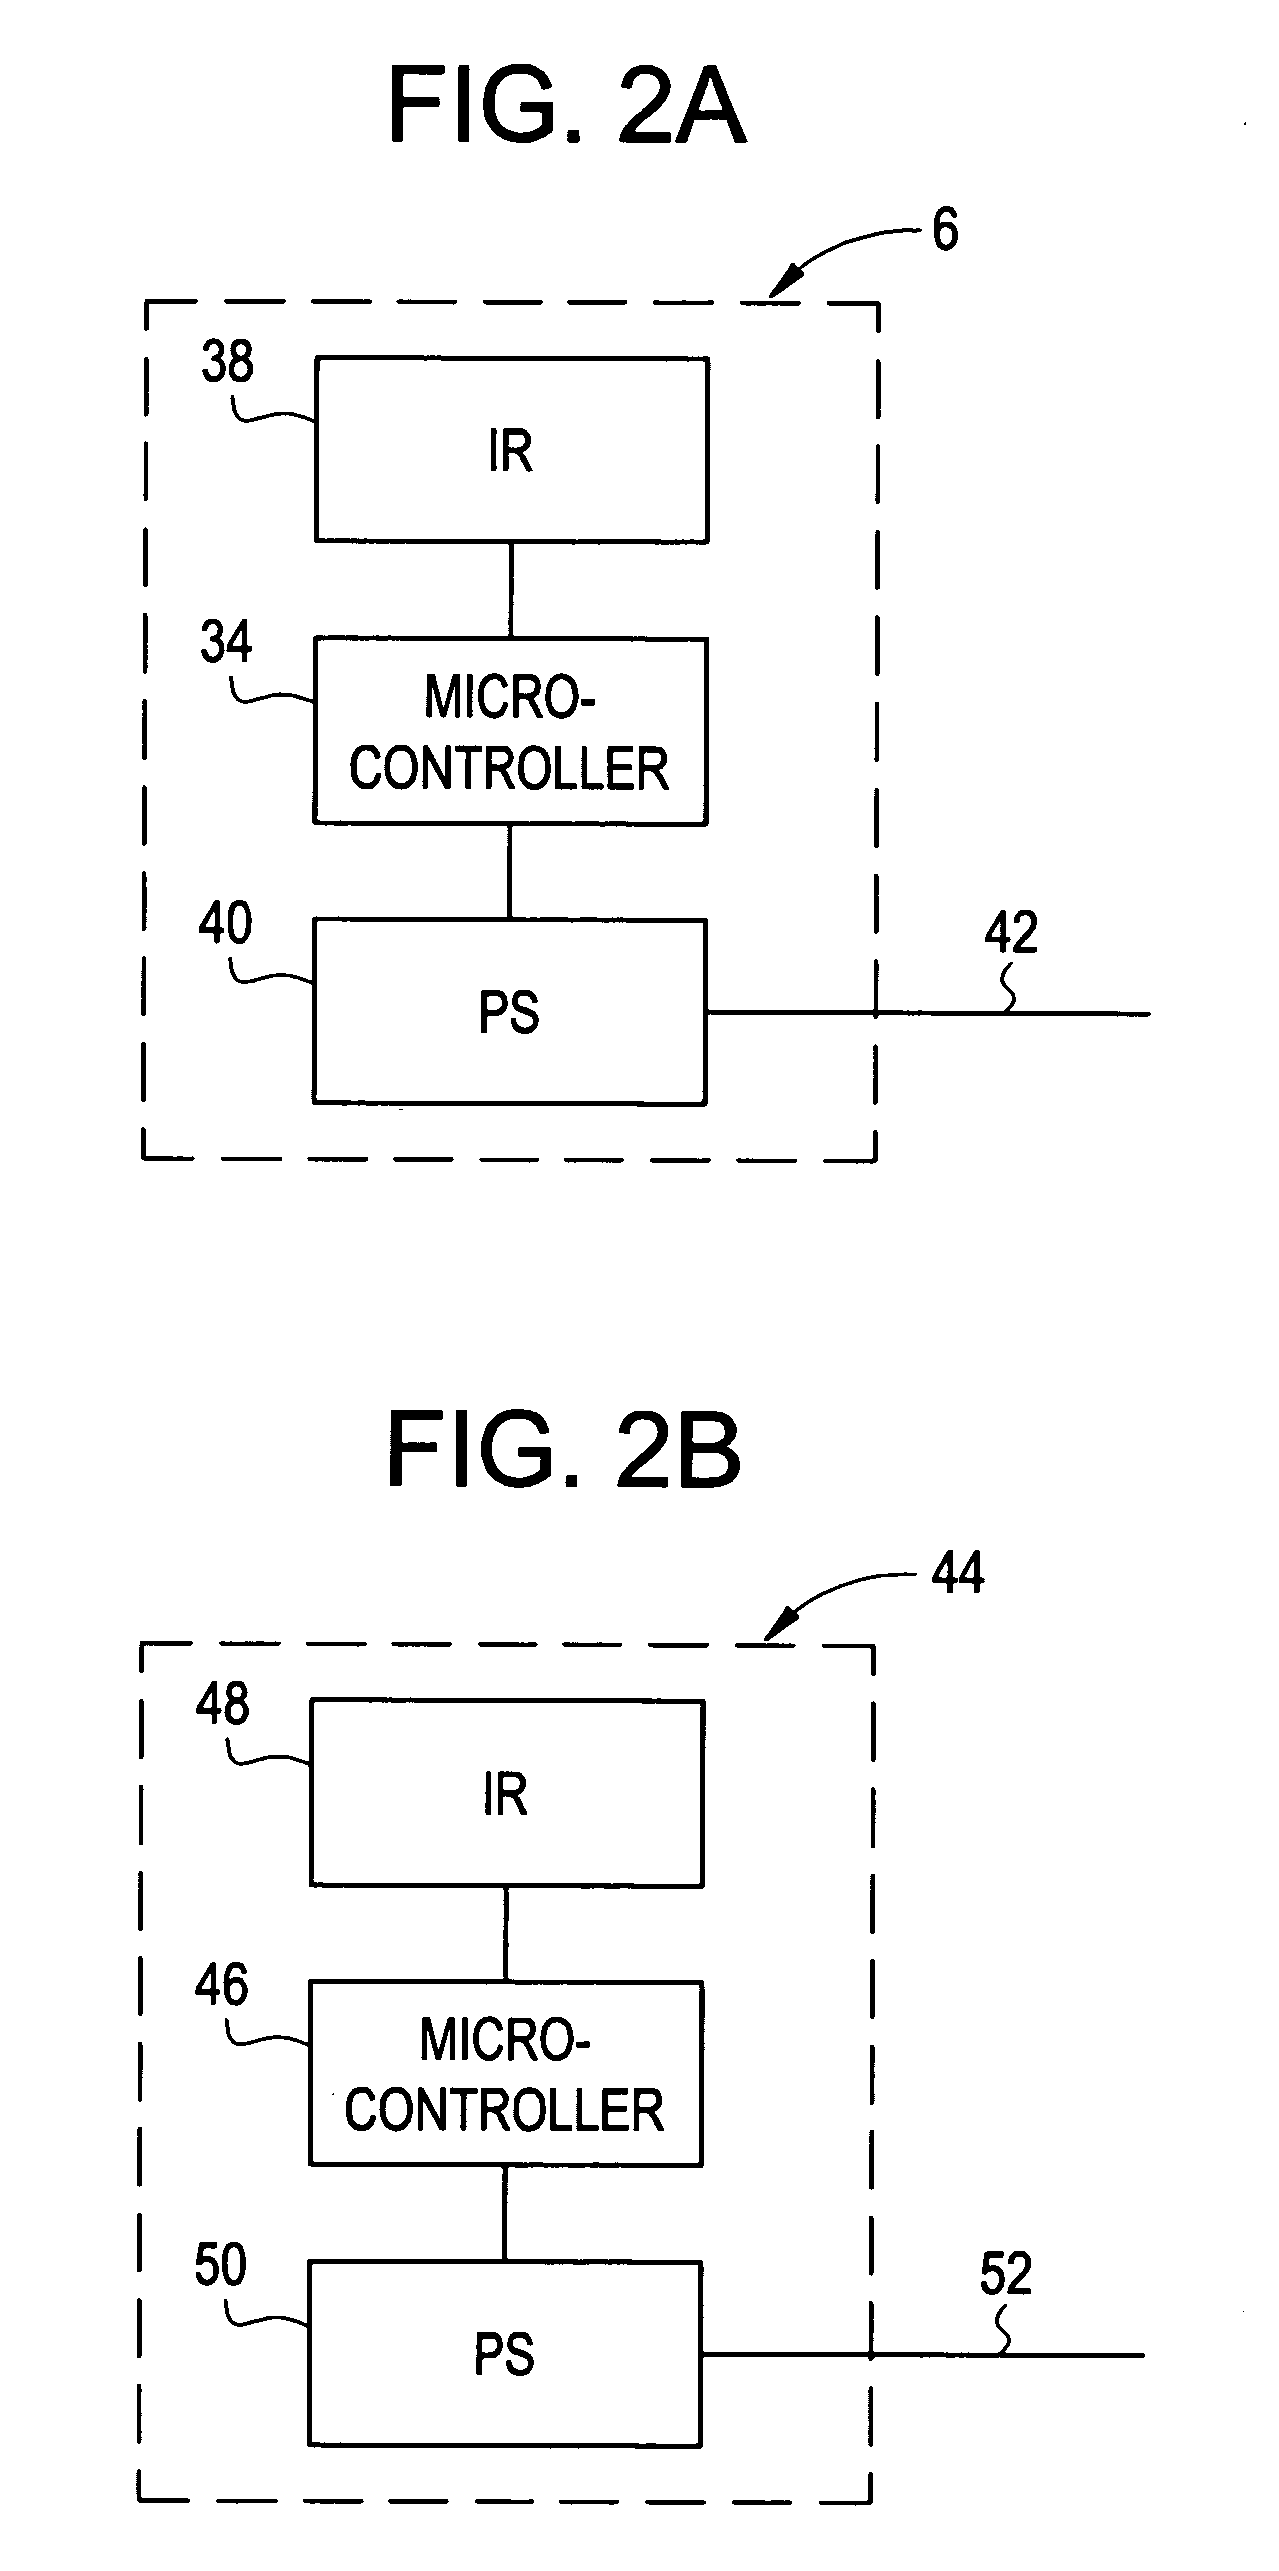 System and method for managing services and facilities in a multi-unit building